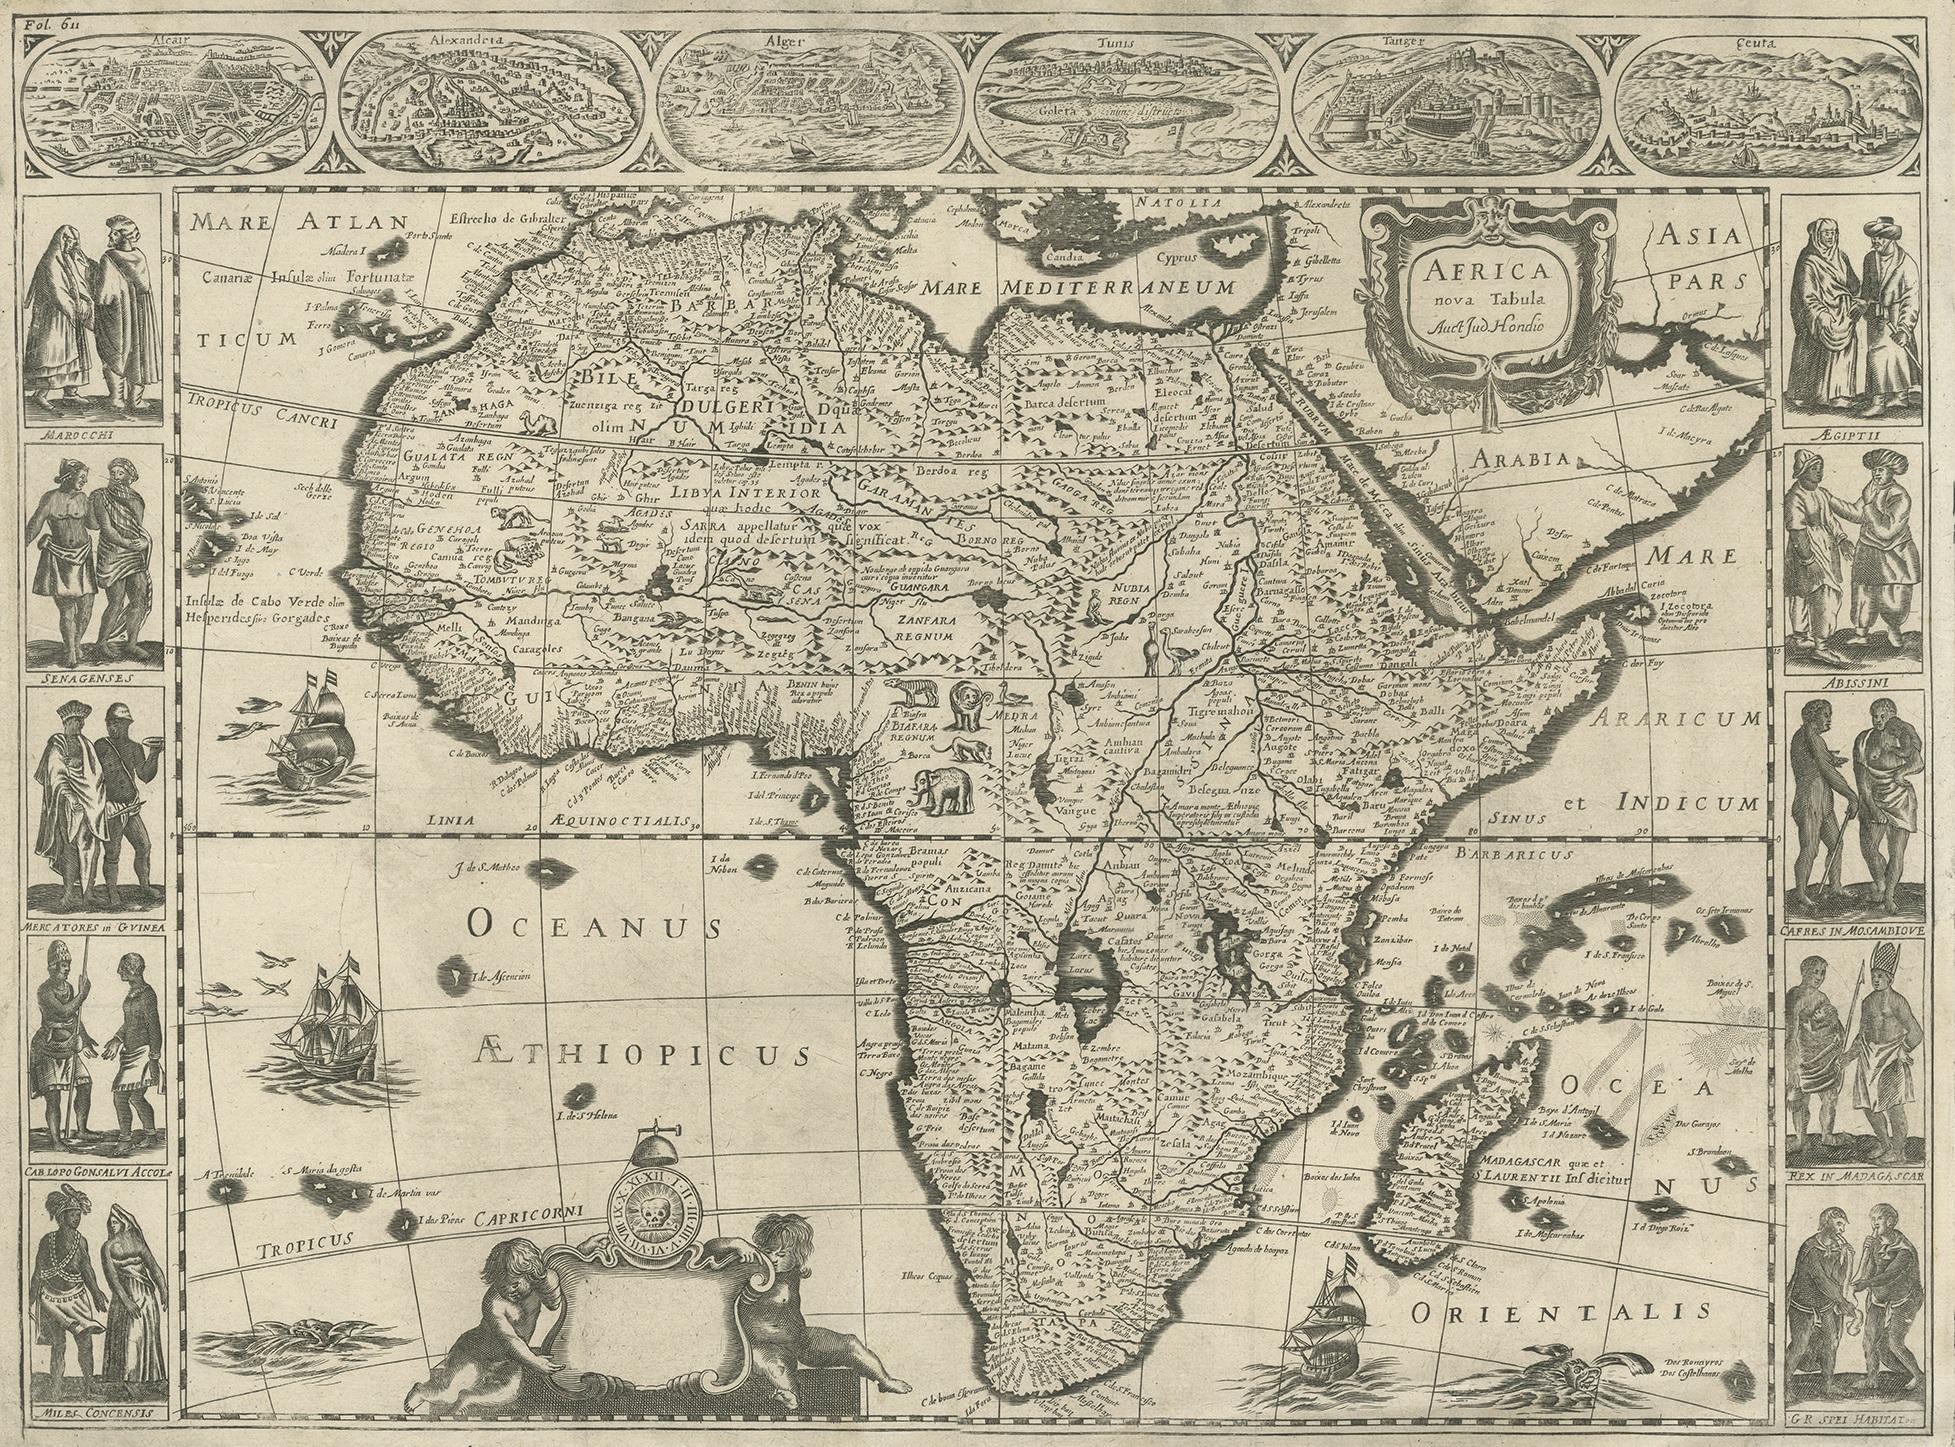 Antique map titled 'Africa Nova Tabula Auct Jud. Hondio'. Beautiful and rare paneled map of Africa, Based Upon Hondius' map. The first derivative of the map was issued separately by Hondius in 1618. This example is based upon the second state of